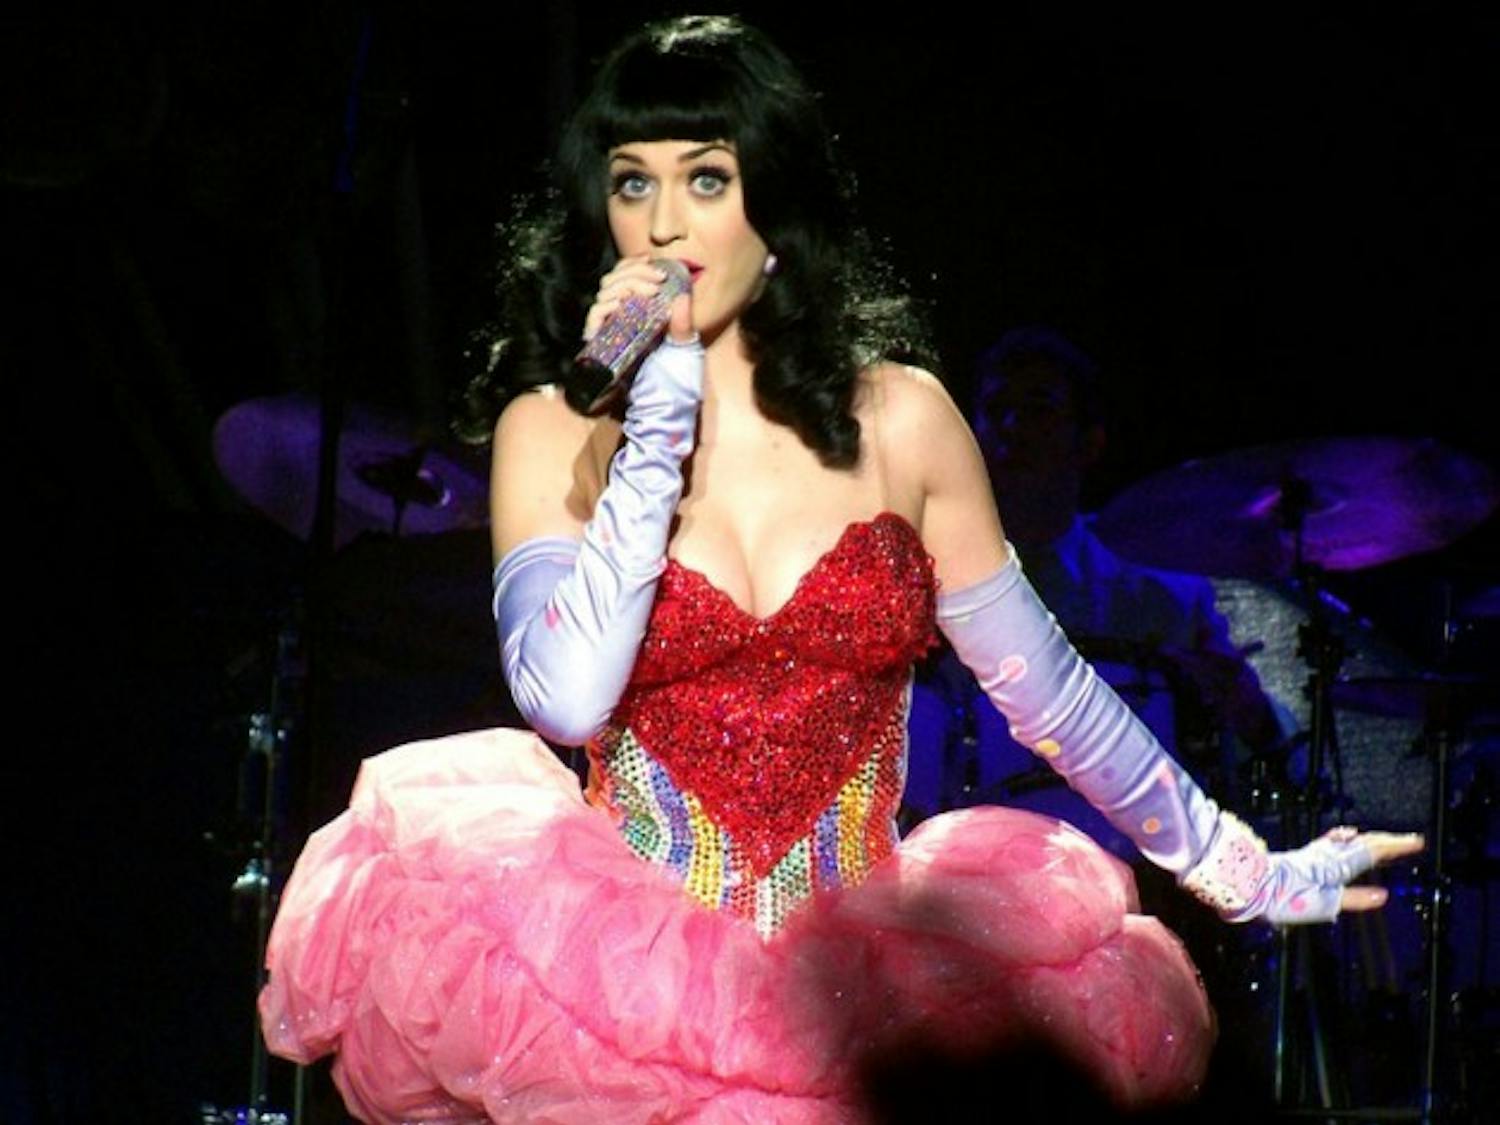 Katy Perry is scheduled to perform during this Sunday&#39;s Super Bowl XLIV halftime show.
Courtesy of Flickr user Samantha Sekula